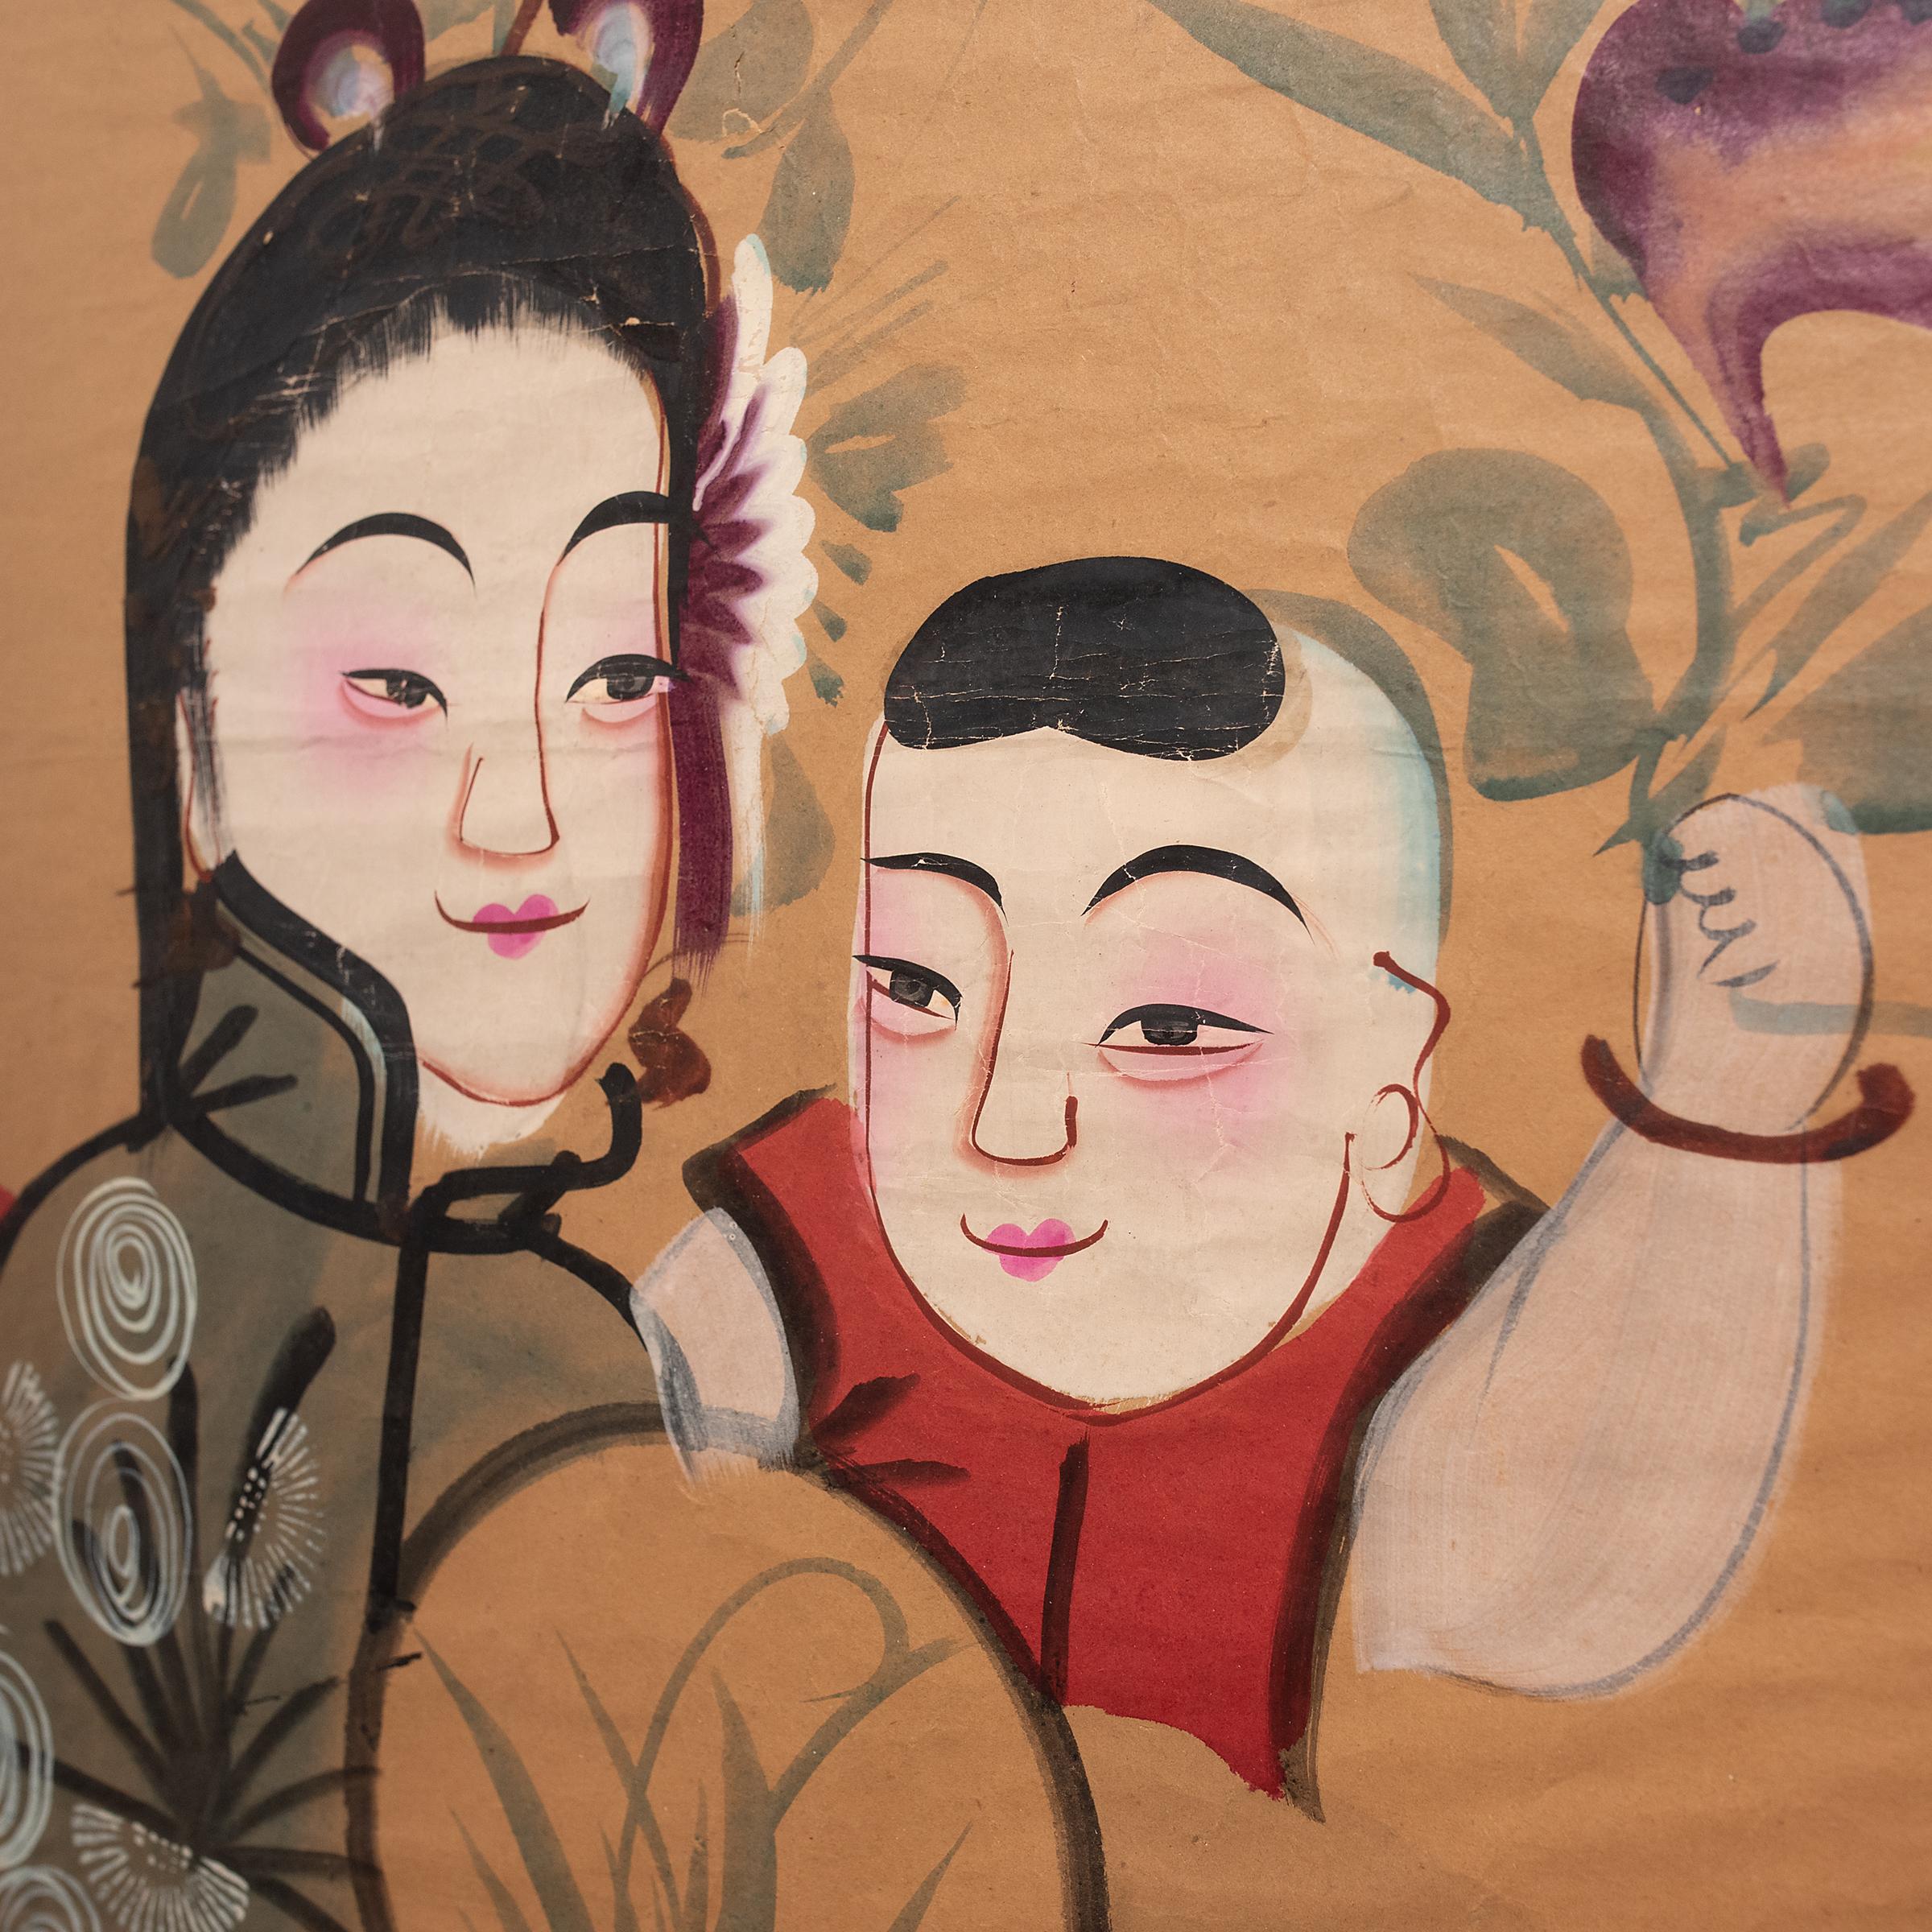 Chinese New Year paintings (nian hua) are colorful folk paintings created to celebrate the annual Spring Festival. Drawn or printed by folk artists in regional studios, nian hua paintings featured exaggerated characters with bright and contrasting